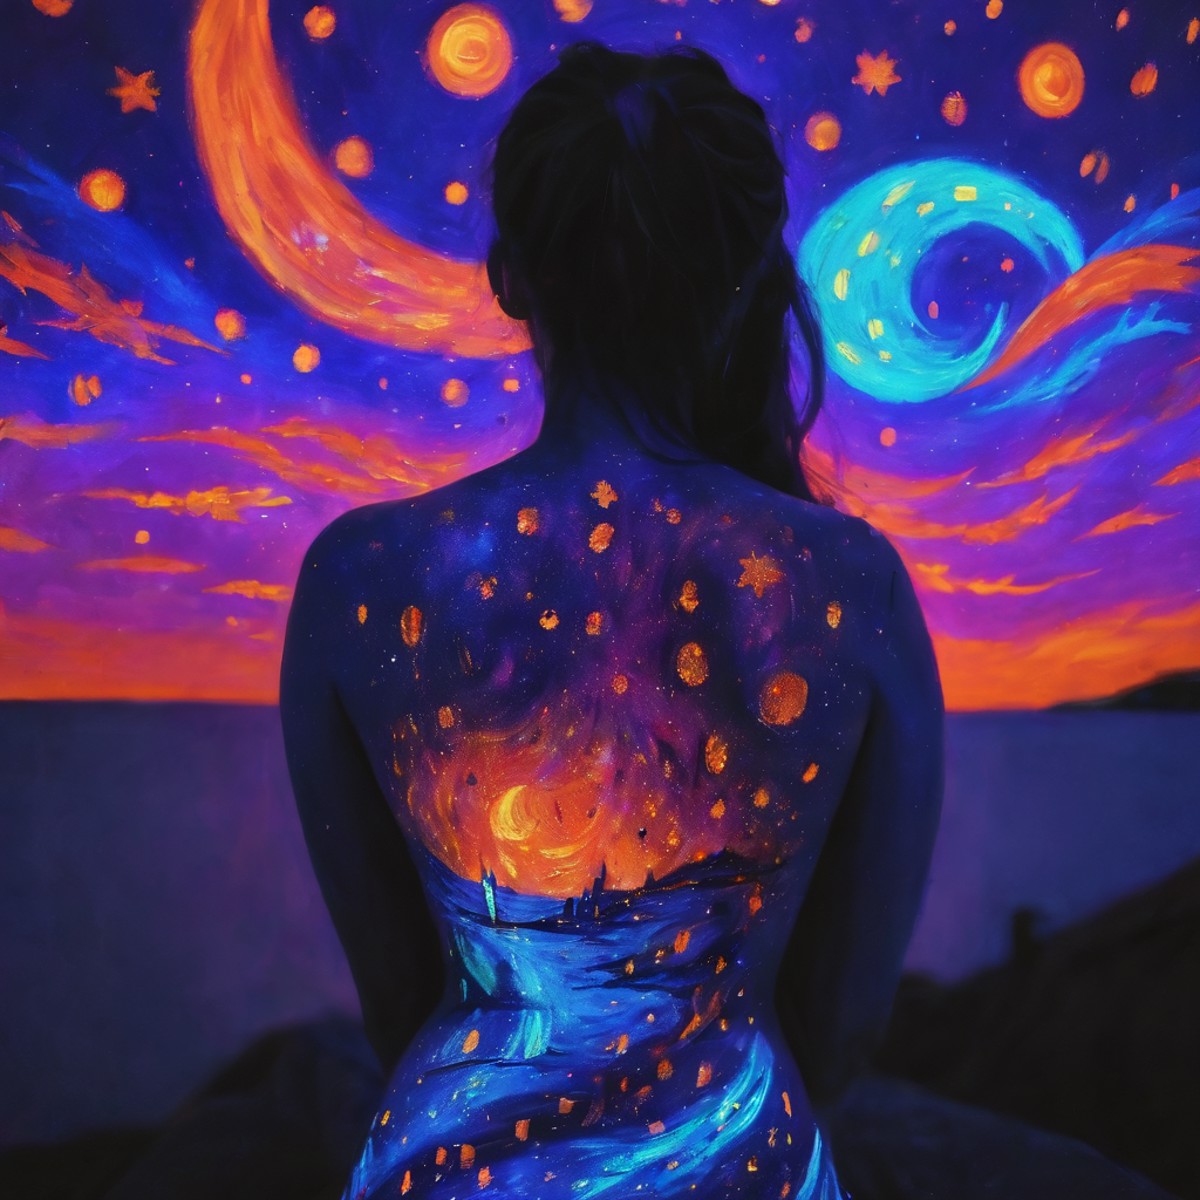 blacklight painted on the back of a girl depicting starry night